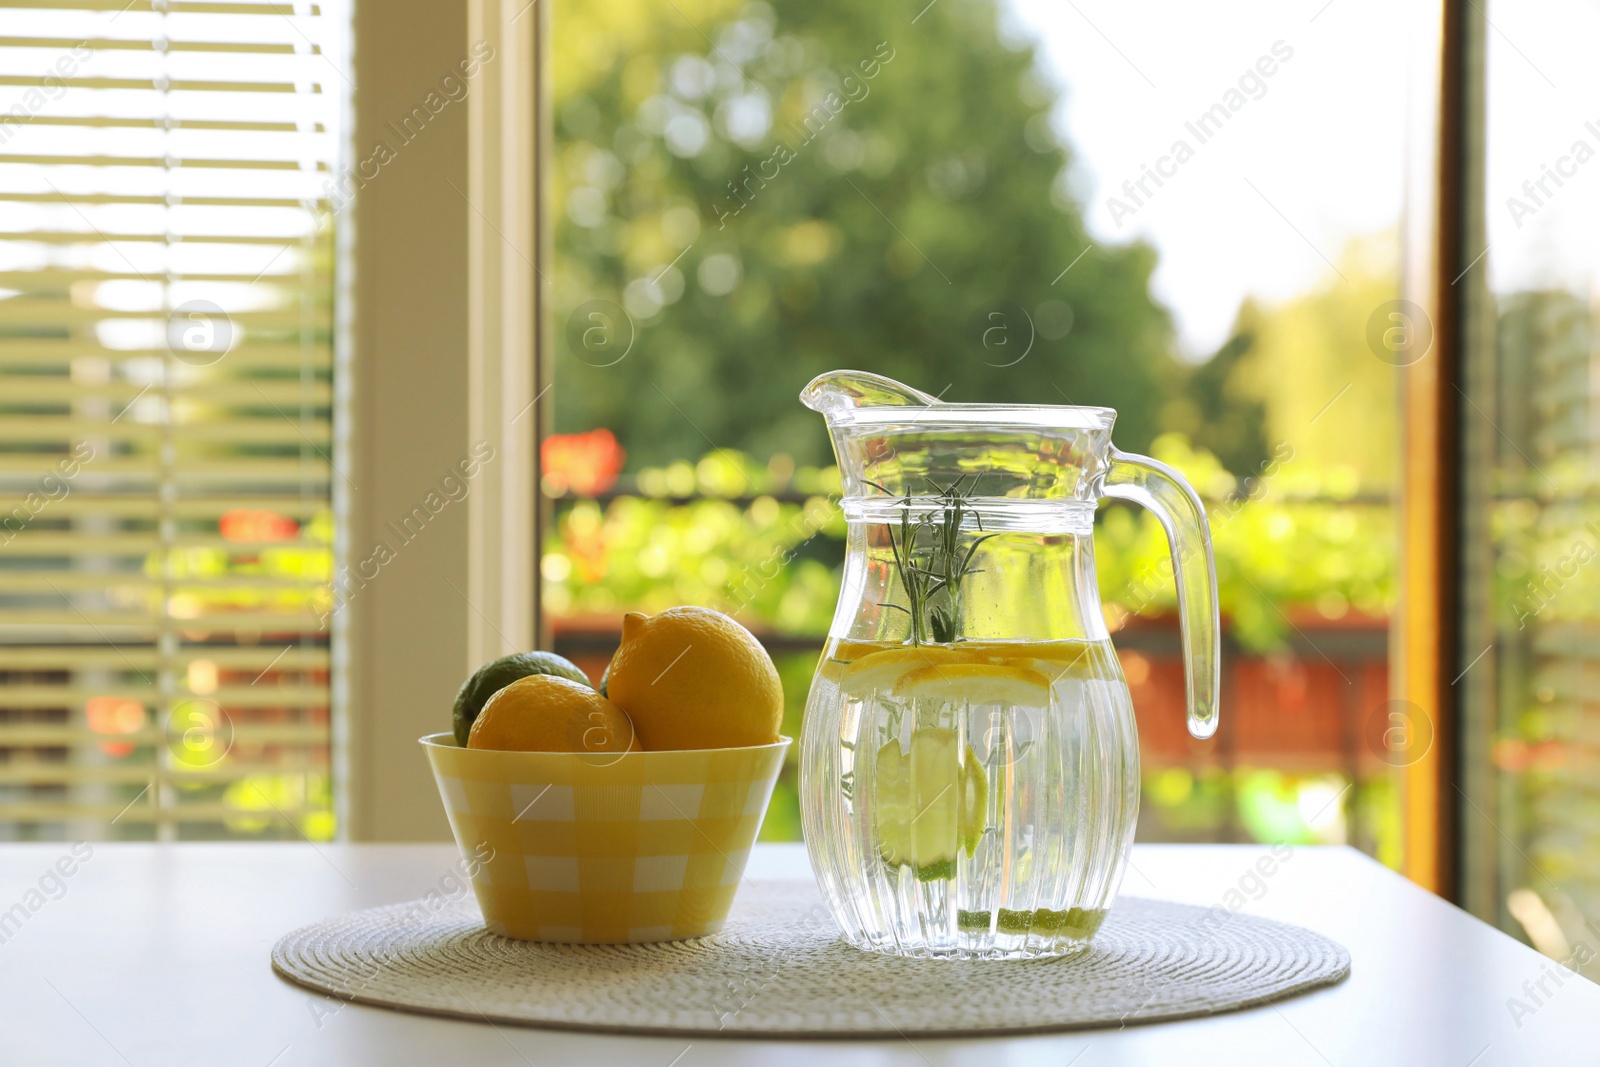 Photo of Jug with refreshing lemon water and citrus fruits in bowl on table indoors